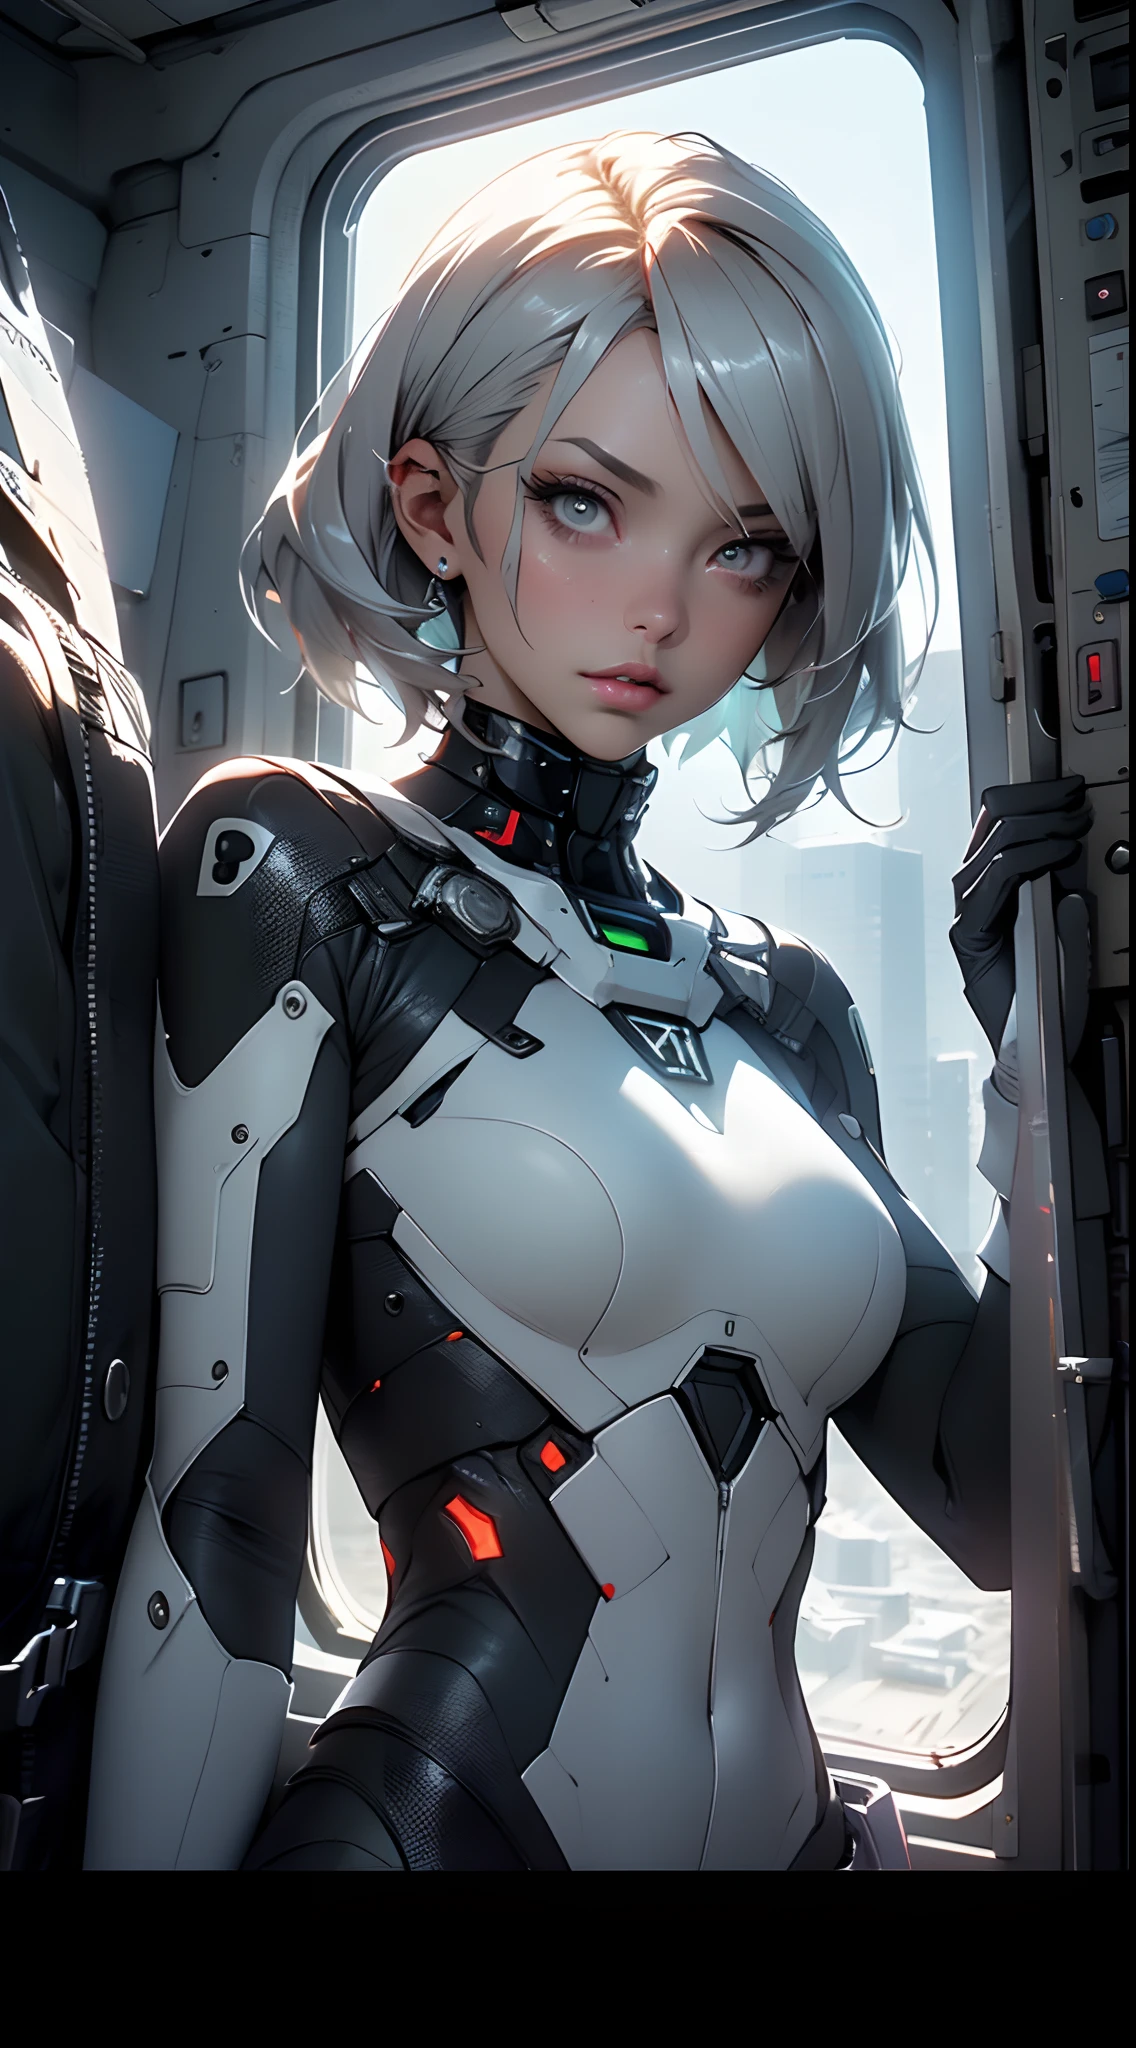 (Best Quality), ((Masterpiece), (Detail: 1.4), 3D, A Beautiful Cyberpunk Woman, HDR (High Dynamic Range), Yong White Woman, Clean Face, Sensual Pose, Shiny Skin, High Contrast, Short Colored Mohawk Hair, Ray Graphics by Clothing, On A Lunar Station, Ships Can Be Seen Through The Large Window, Satin Apparel, Ray Tracing, NVIDIA RTX, Super-Resolution, Unreal 5, Subsurface Scattering, PBR Textures,  Post-Processing, Anisotropic Filtering, Depth of Field, Maximum Sharpness and Sharpening, Multilayer Textures, Albedo and Enhancement Maps, Surface Shading, Accurate simulation of light-material interactions, perfect proportions, Octane Render, Two-color light, large aperture, low ISO, white balance, rule of thirds, 8K RAW,